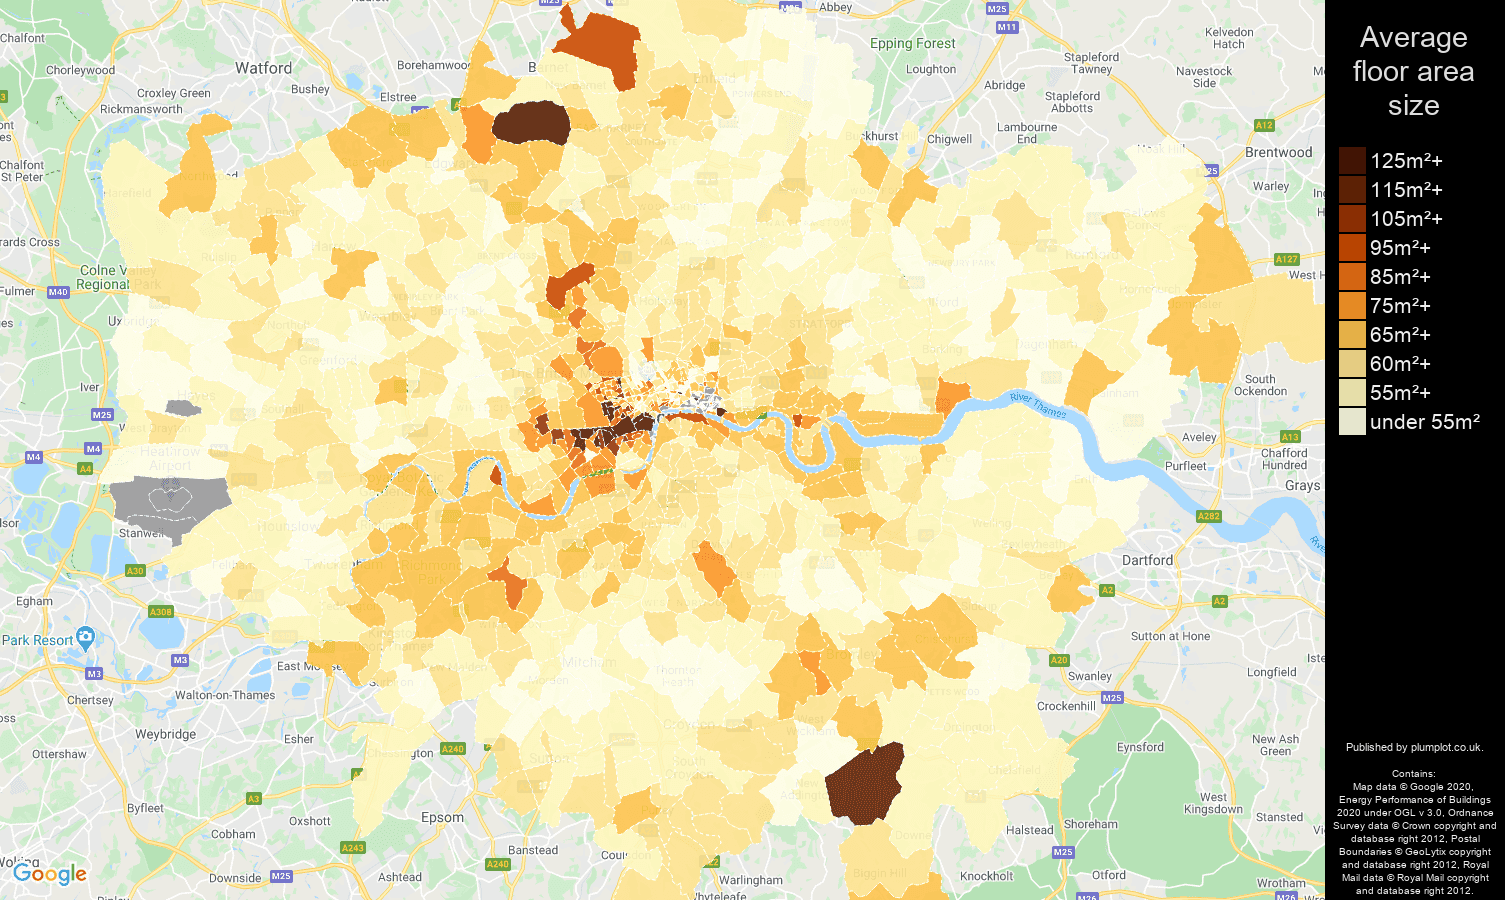 London map of average floor area size of flats